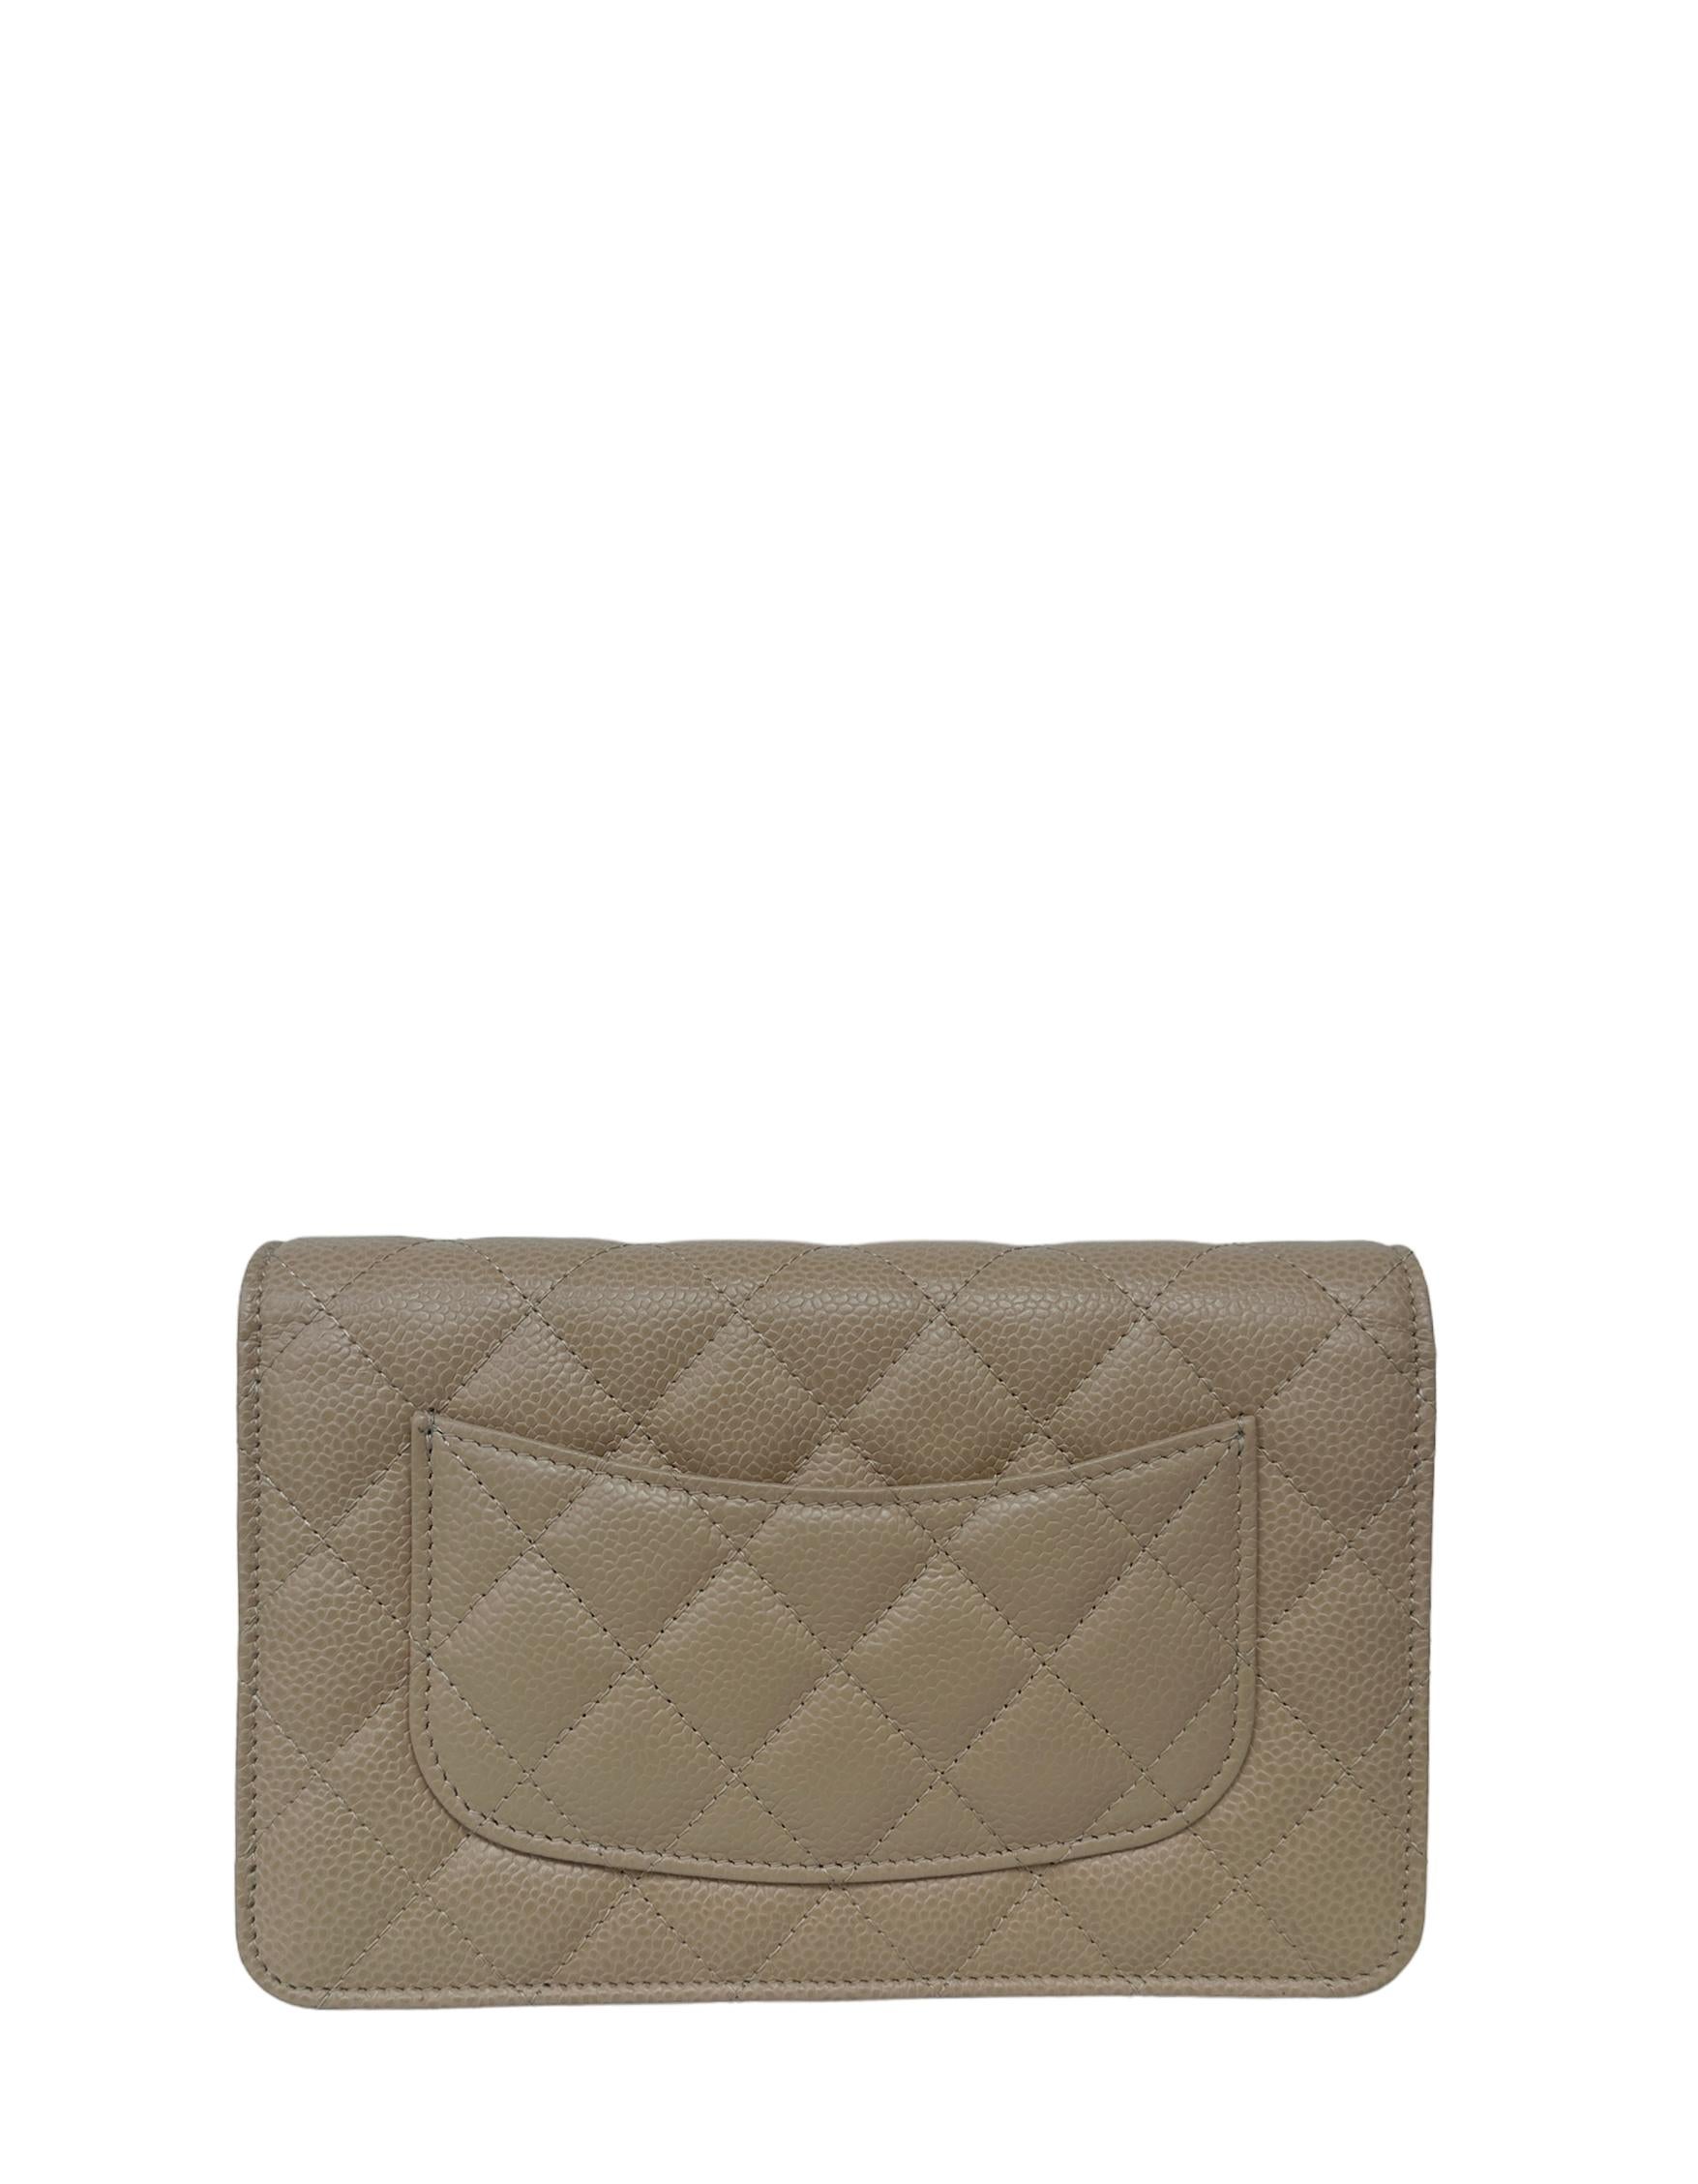 Chanel 2023 NEW Beige Quilted Caviar Leather Wallet On Chain WOC Crossbody Bag. Chain can be tucked inside bag to also be worn as a clutch. 
Made In: Italy
Year of Production: 2023
Color: Beige
Hardware: Light goldtone
Materials: Caviar